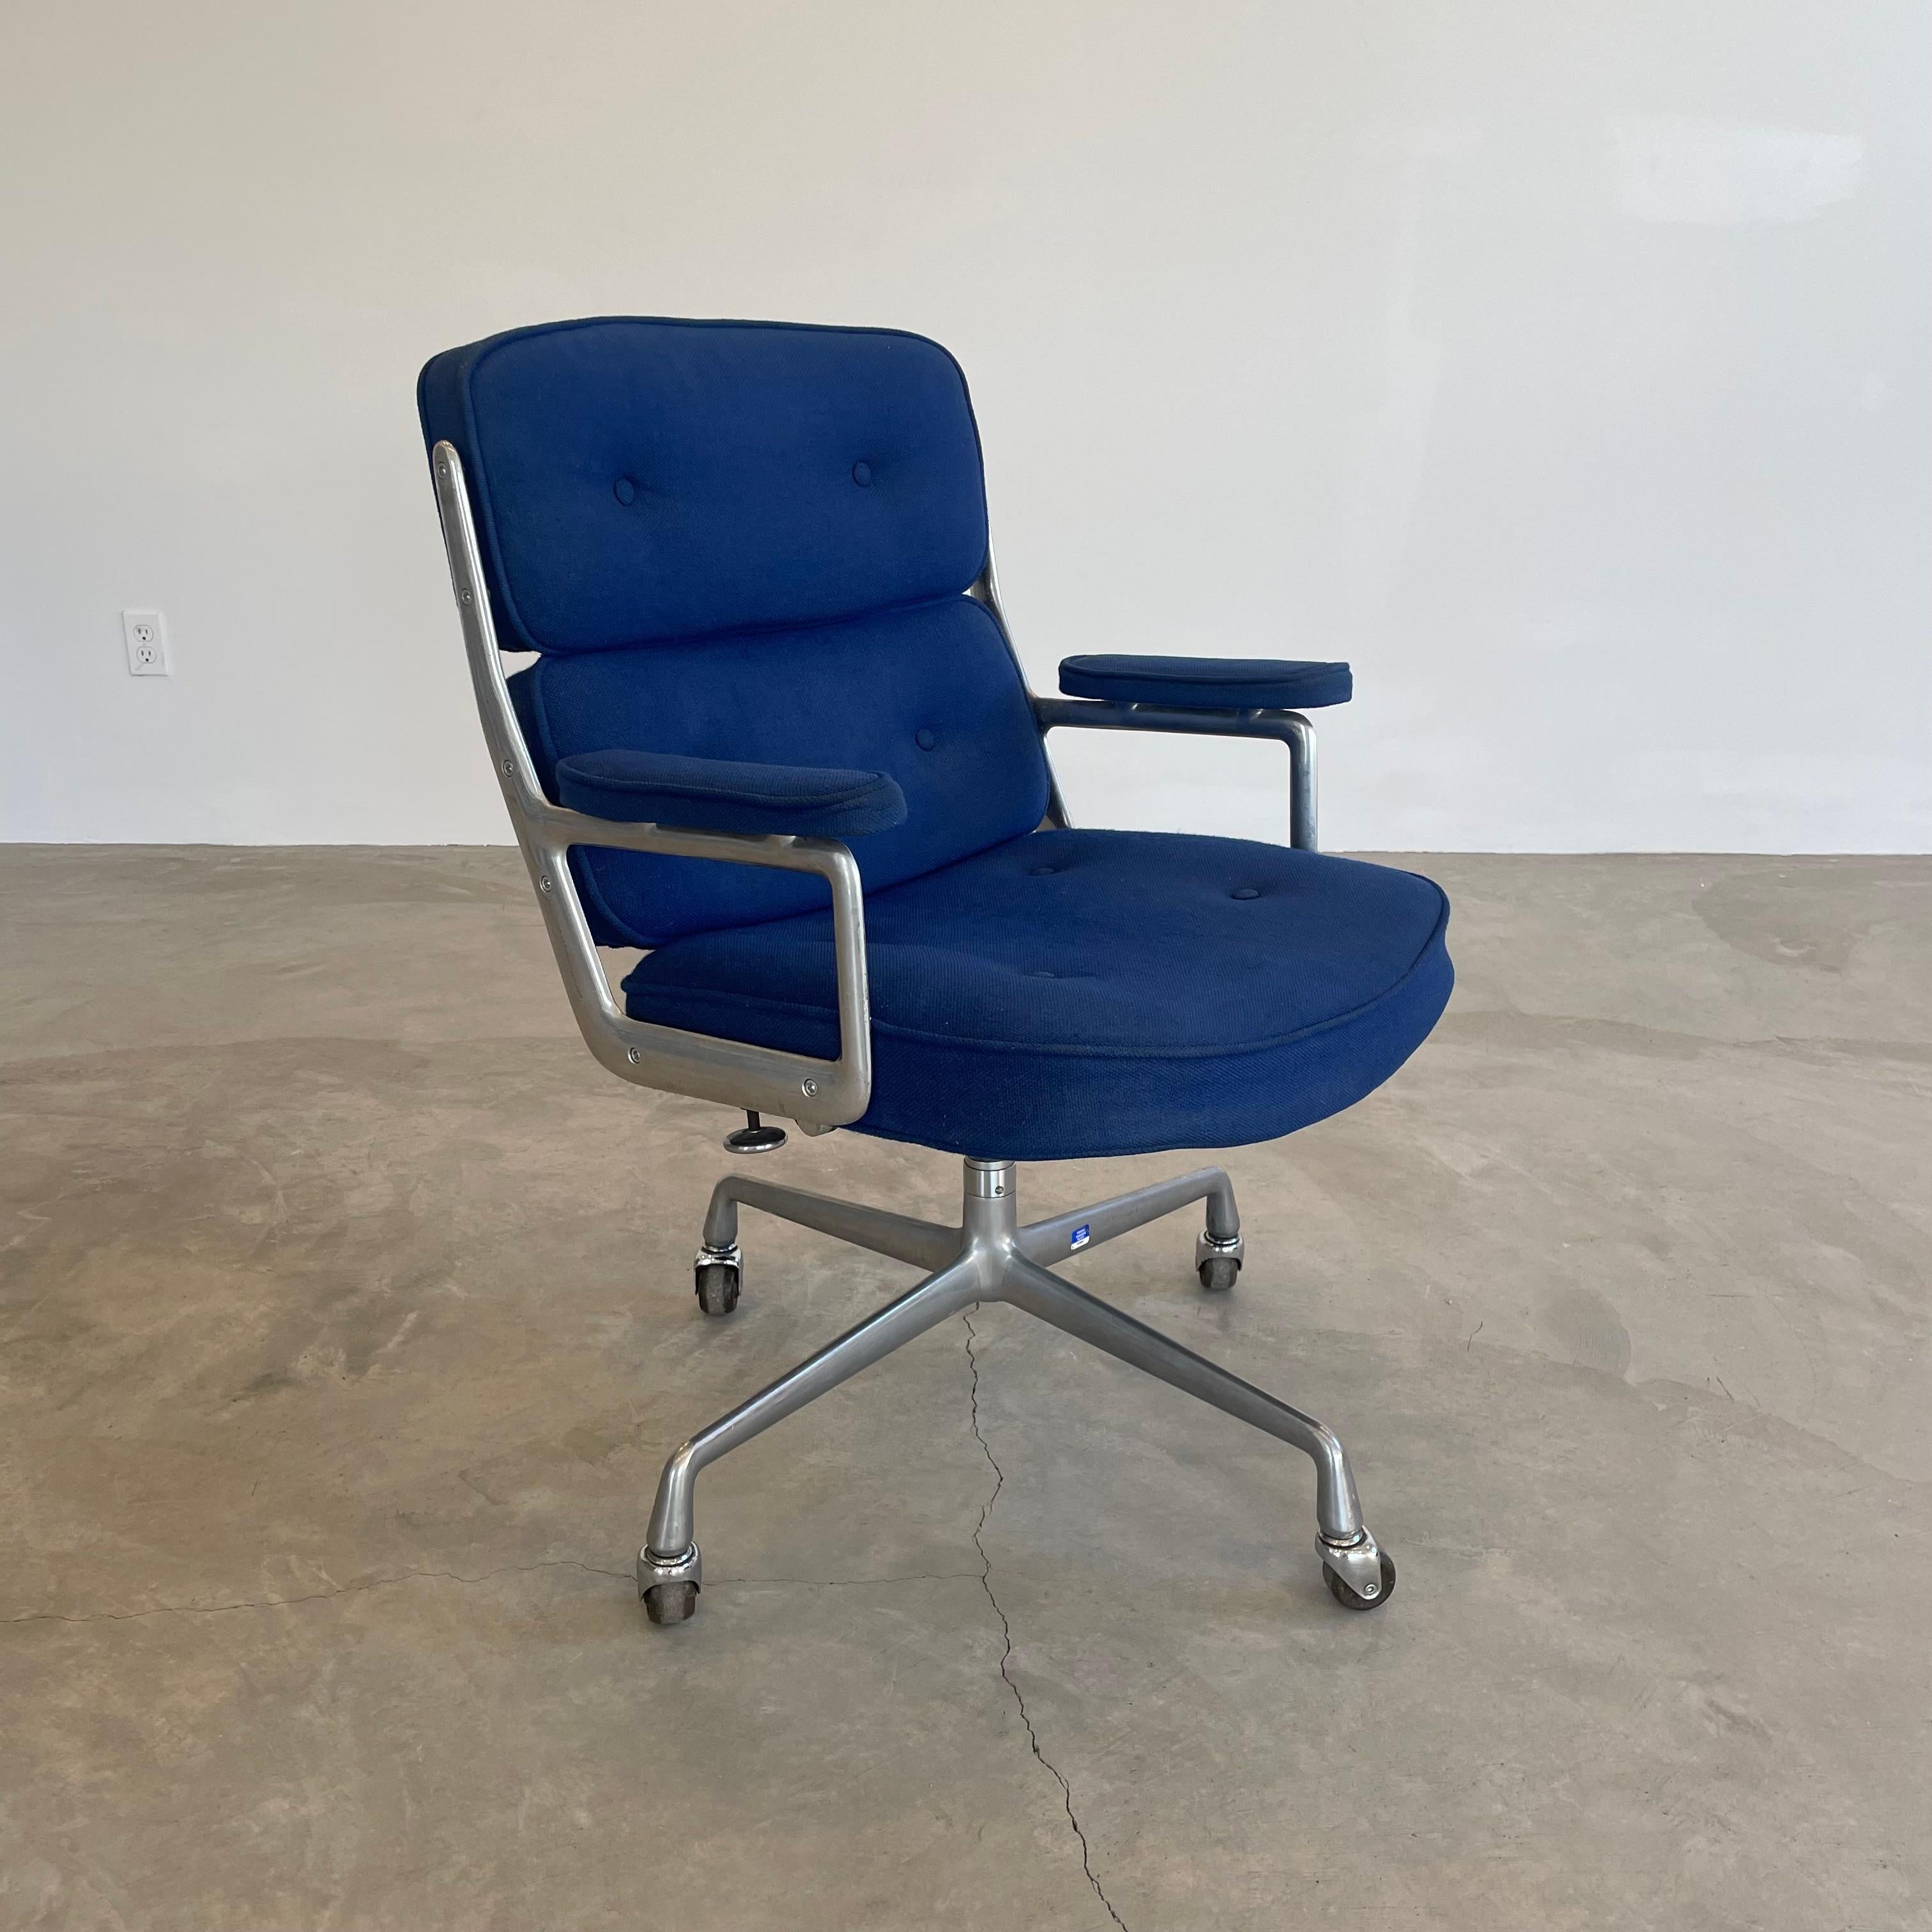 Mid-Century Modern Eames Time Life Chair in Navy Blue Burlap for Herman Miller, 1978 USA For Sale